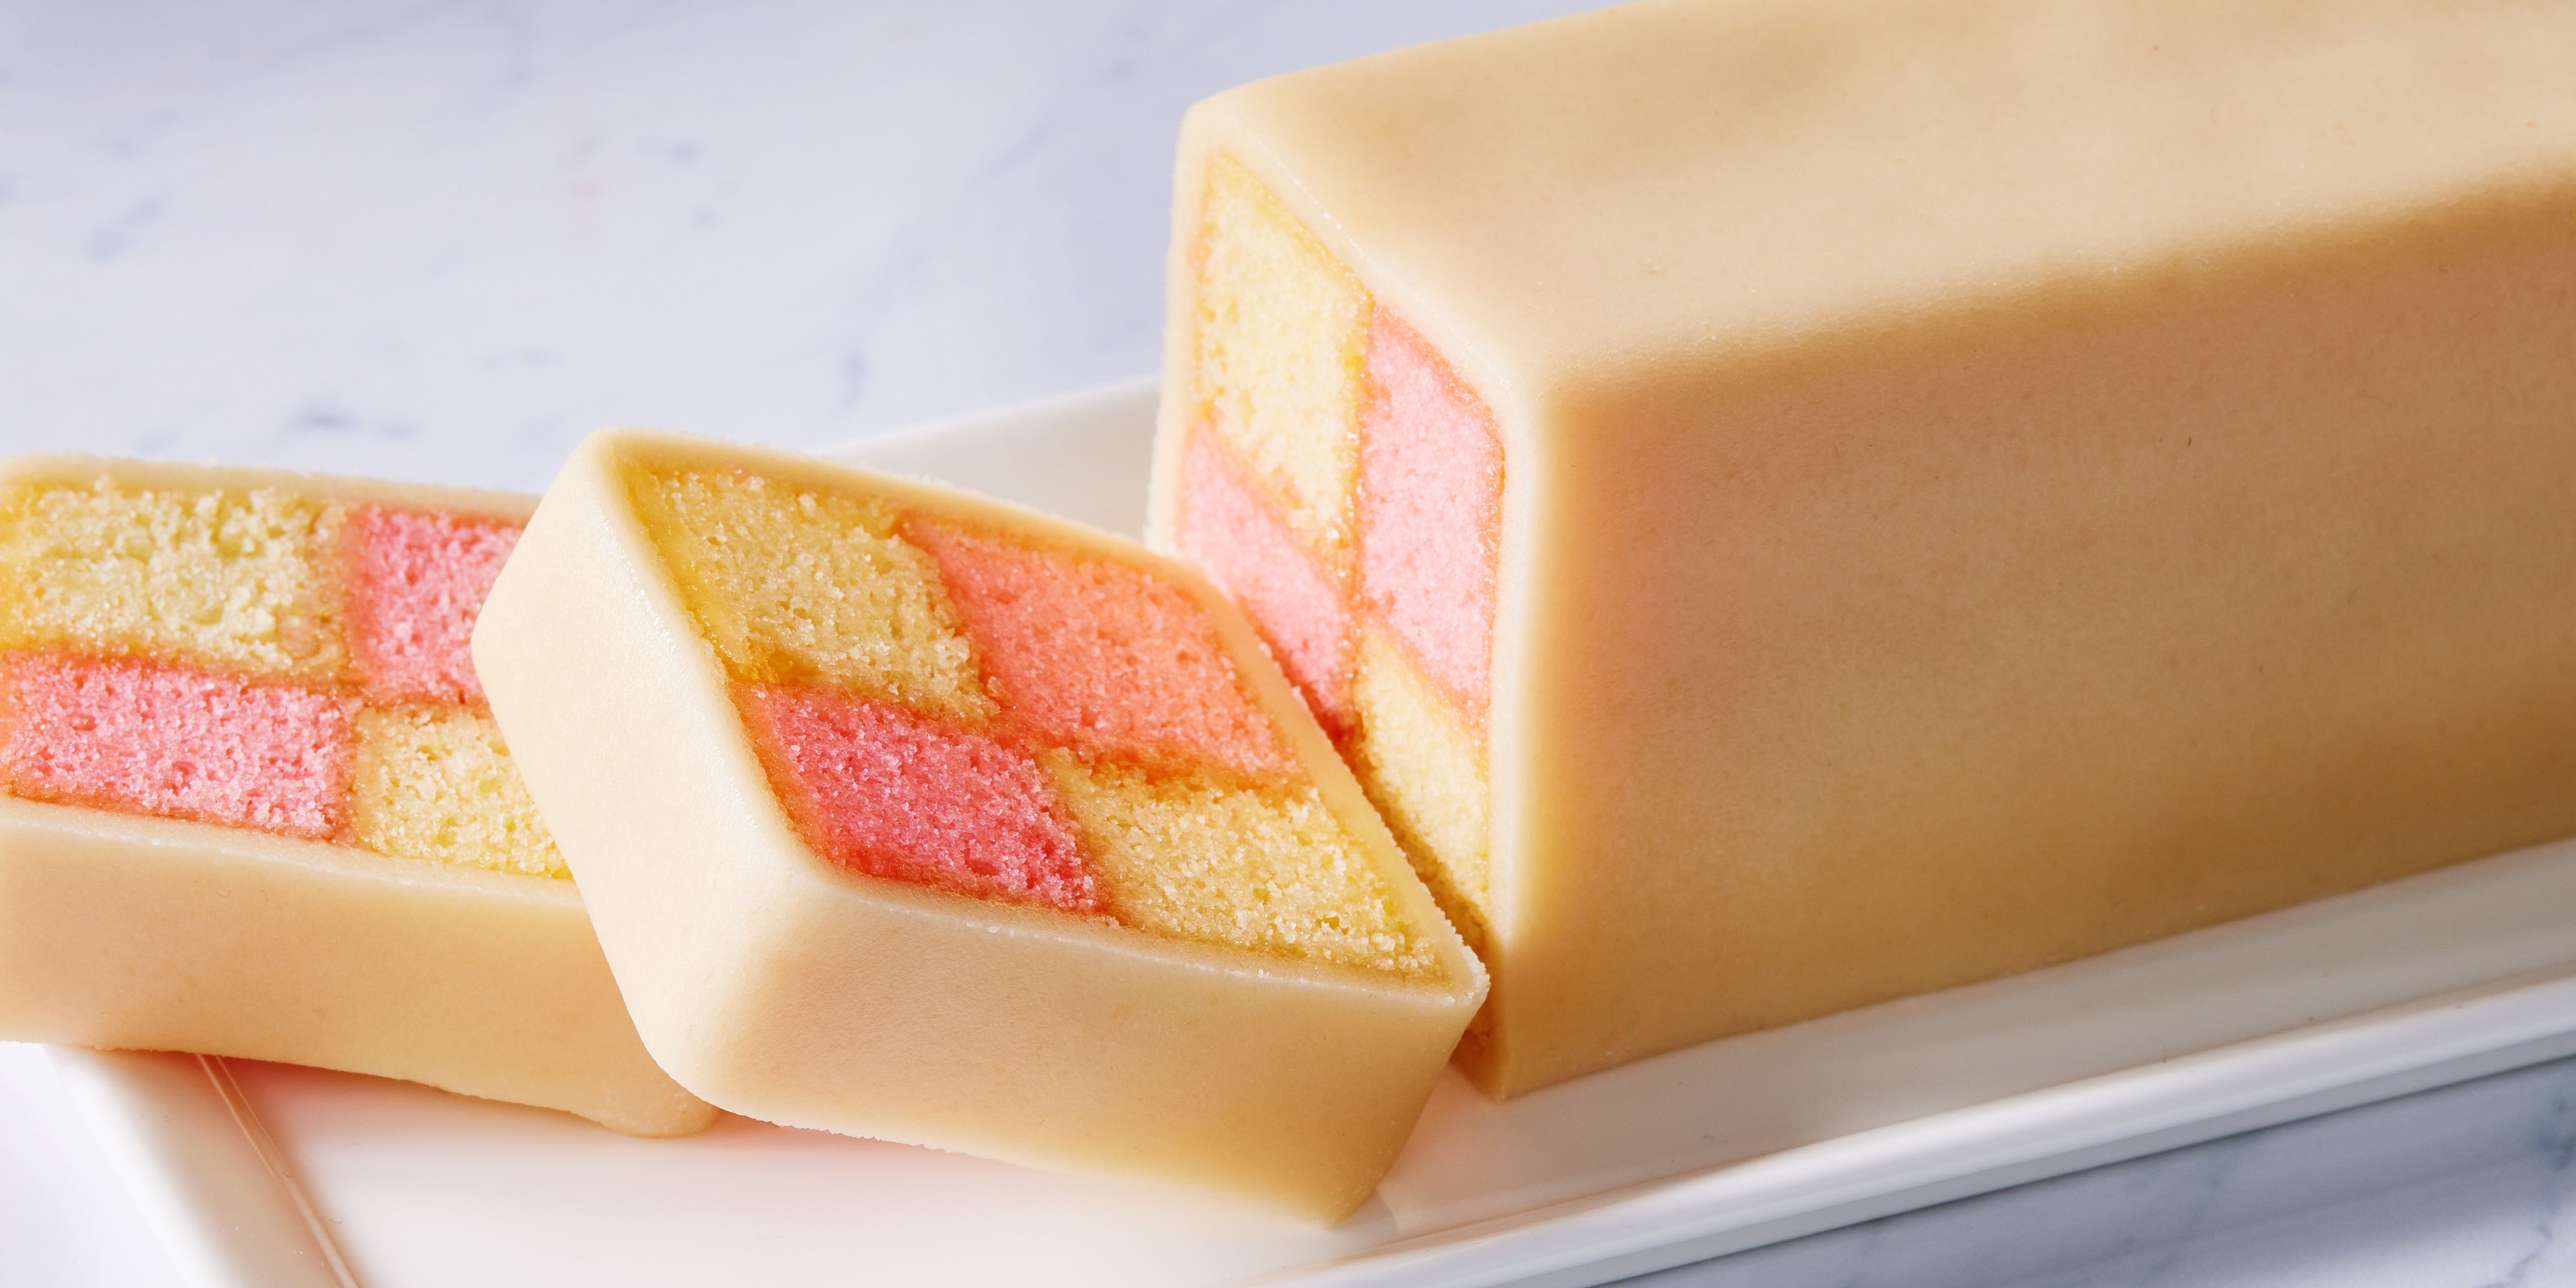 How to make a Battenberg cake